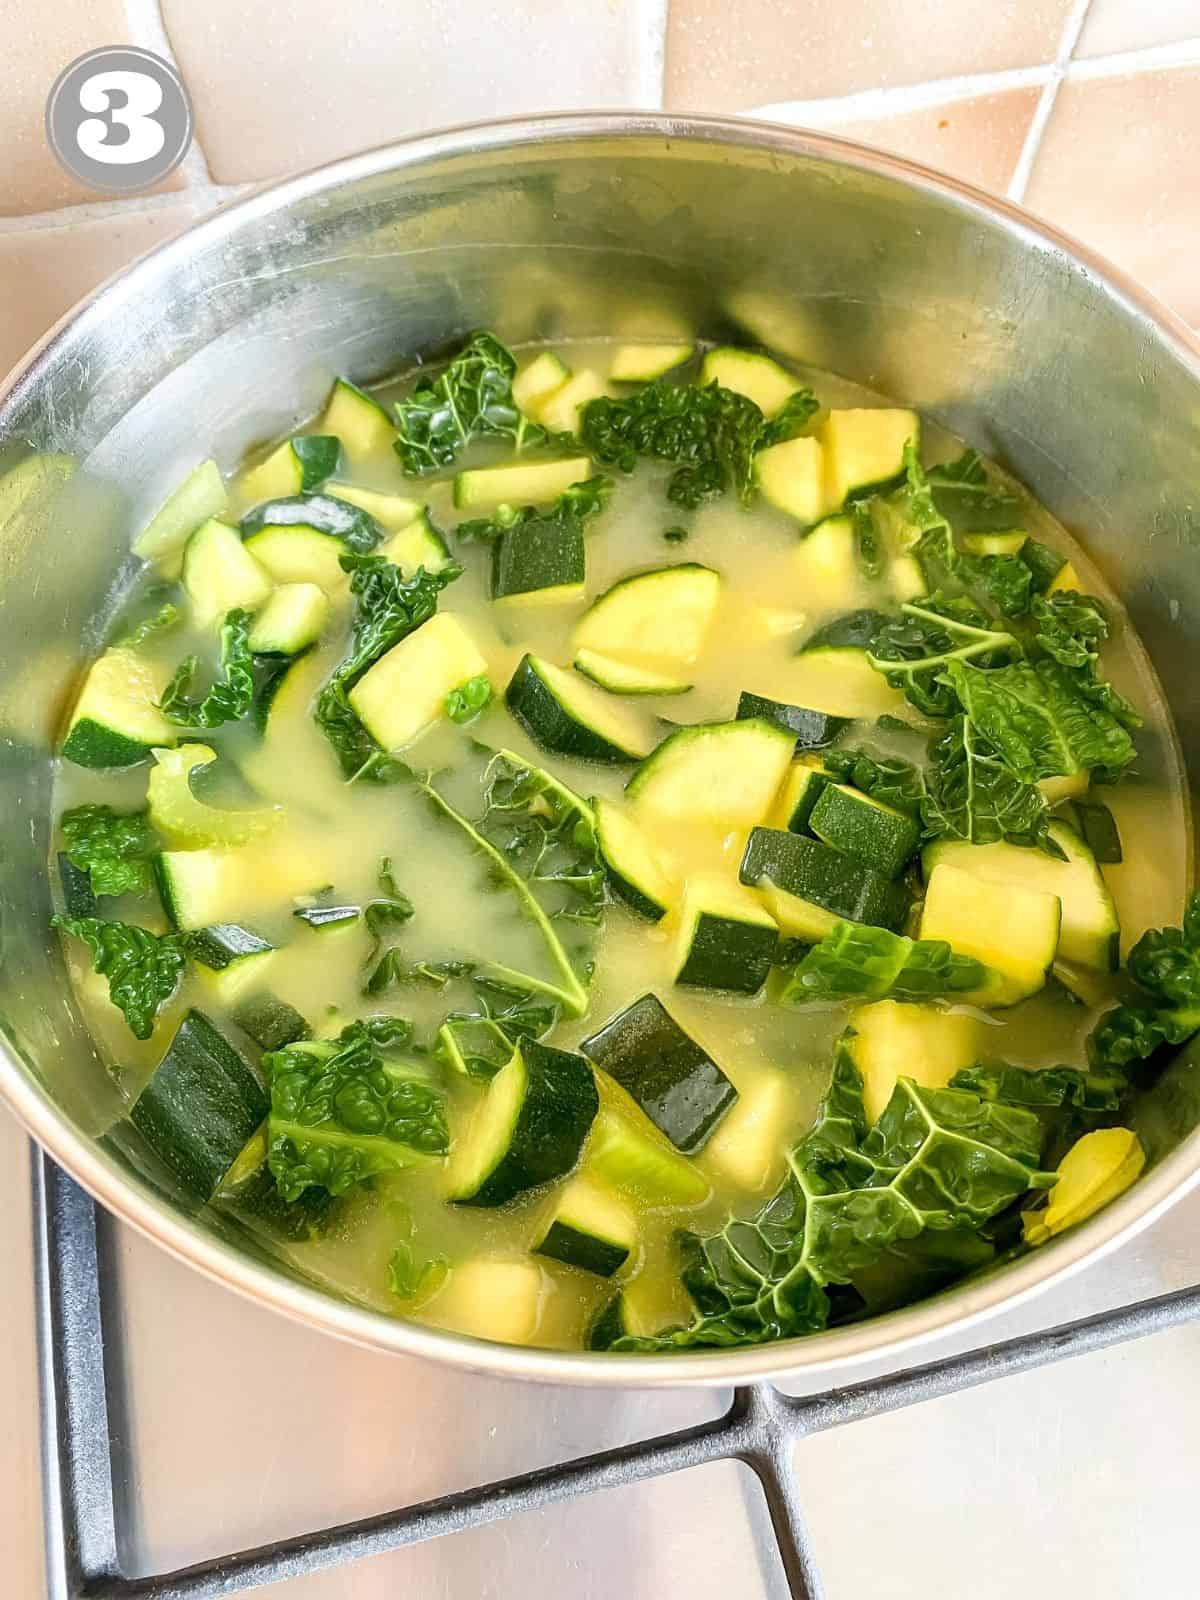 zucchini and cabbage in vegetable broth in a pot.